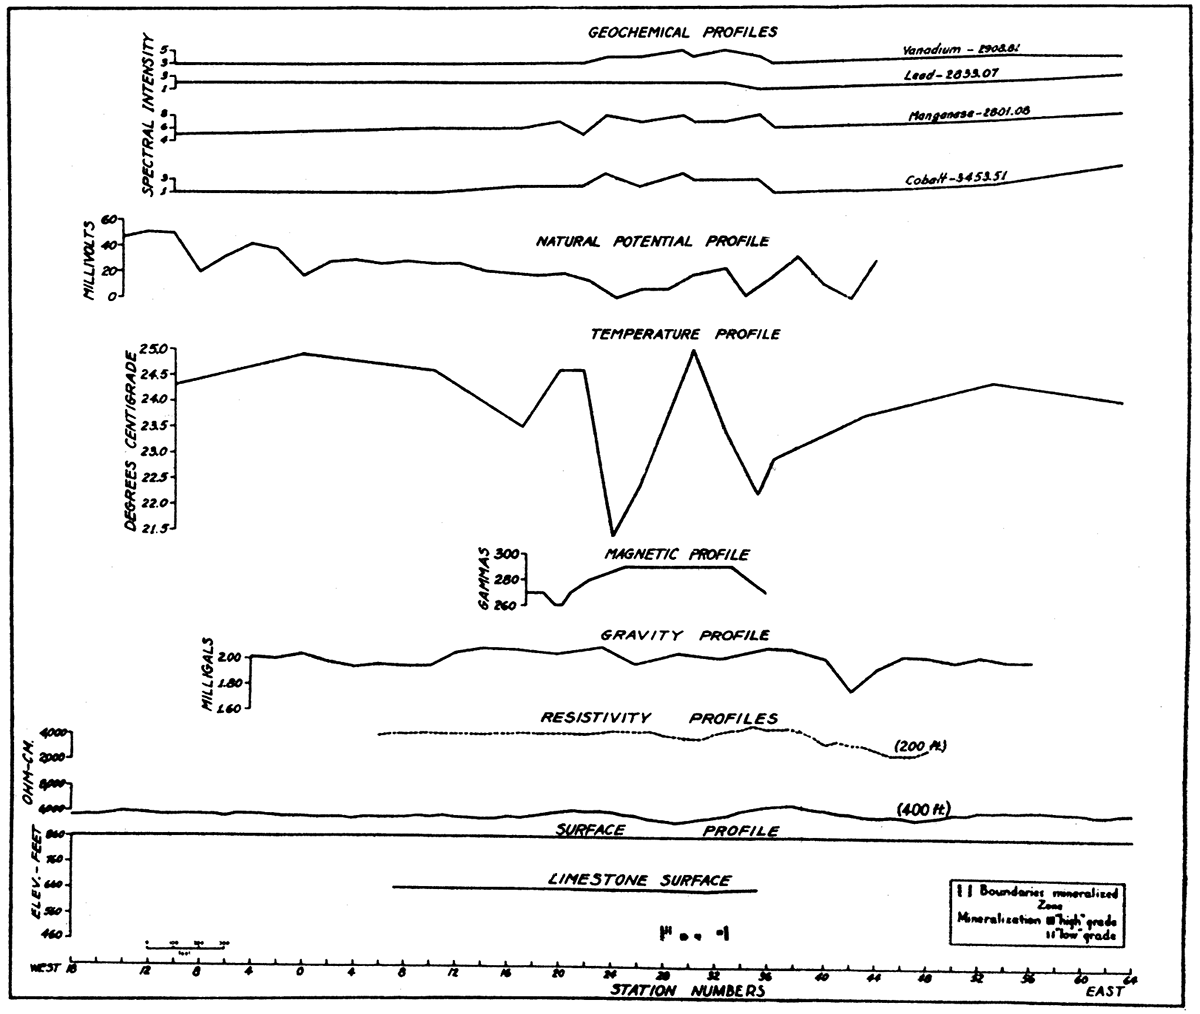 Profiles along traverse V-V' in the Karcher area, showing magnetic, gravity, natural potential, resistivity, geothermal, and geochemical anomalies, zone of mineralization, and configuration of the top of the limestone.